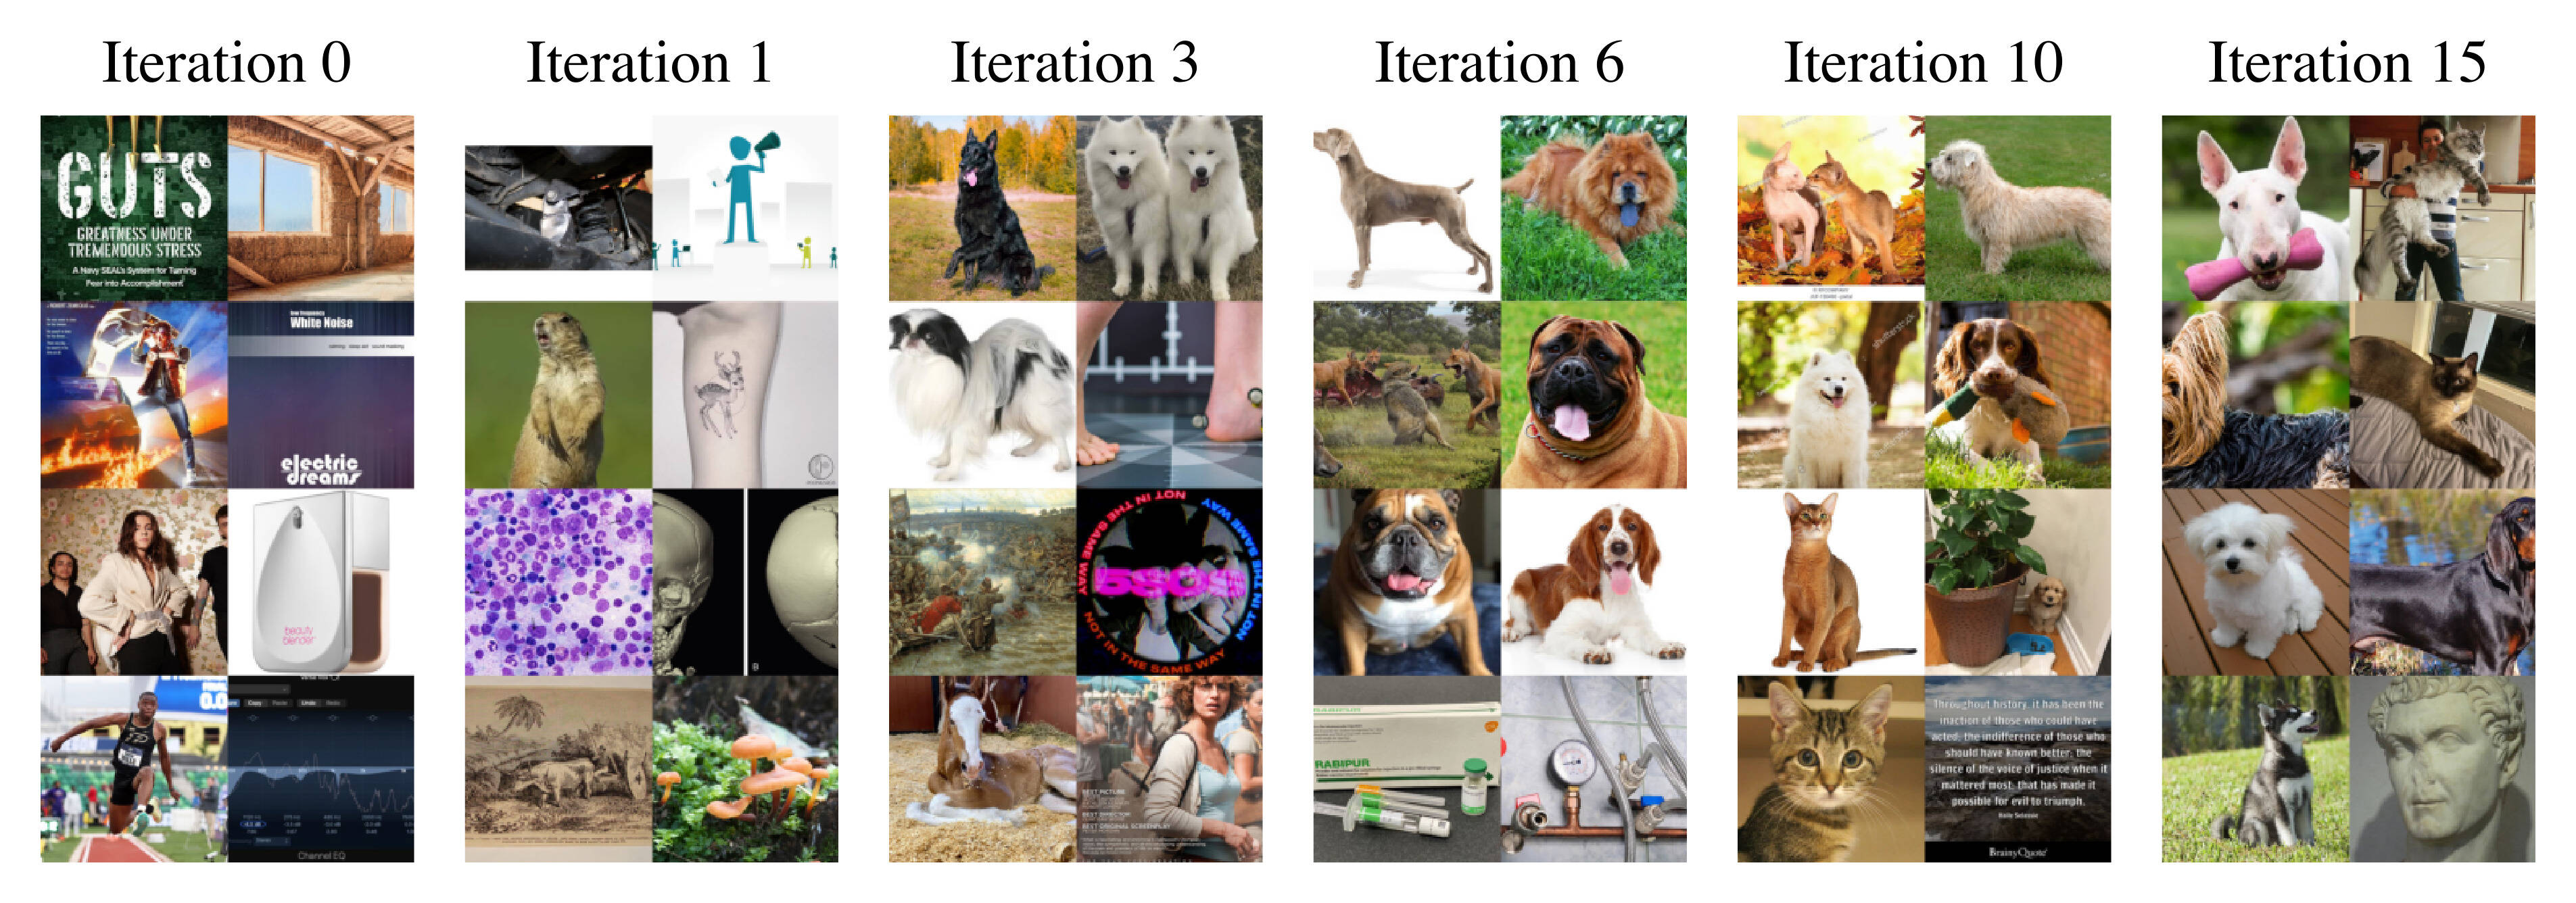 Pets progression over iterations.